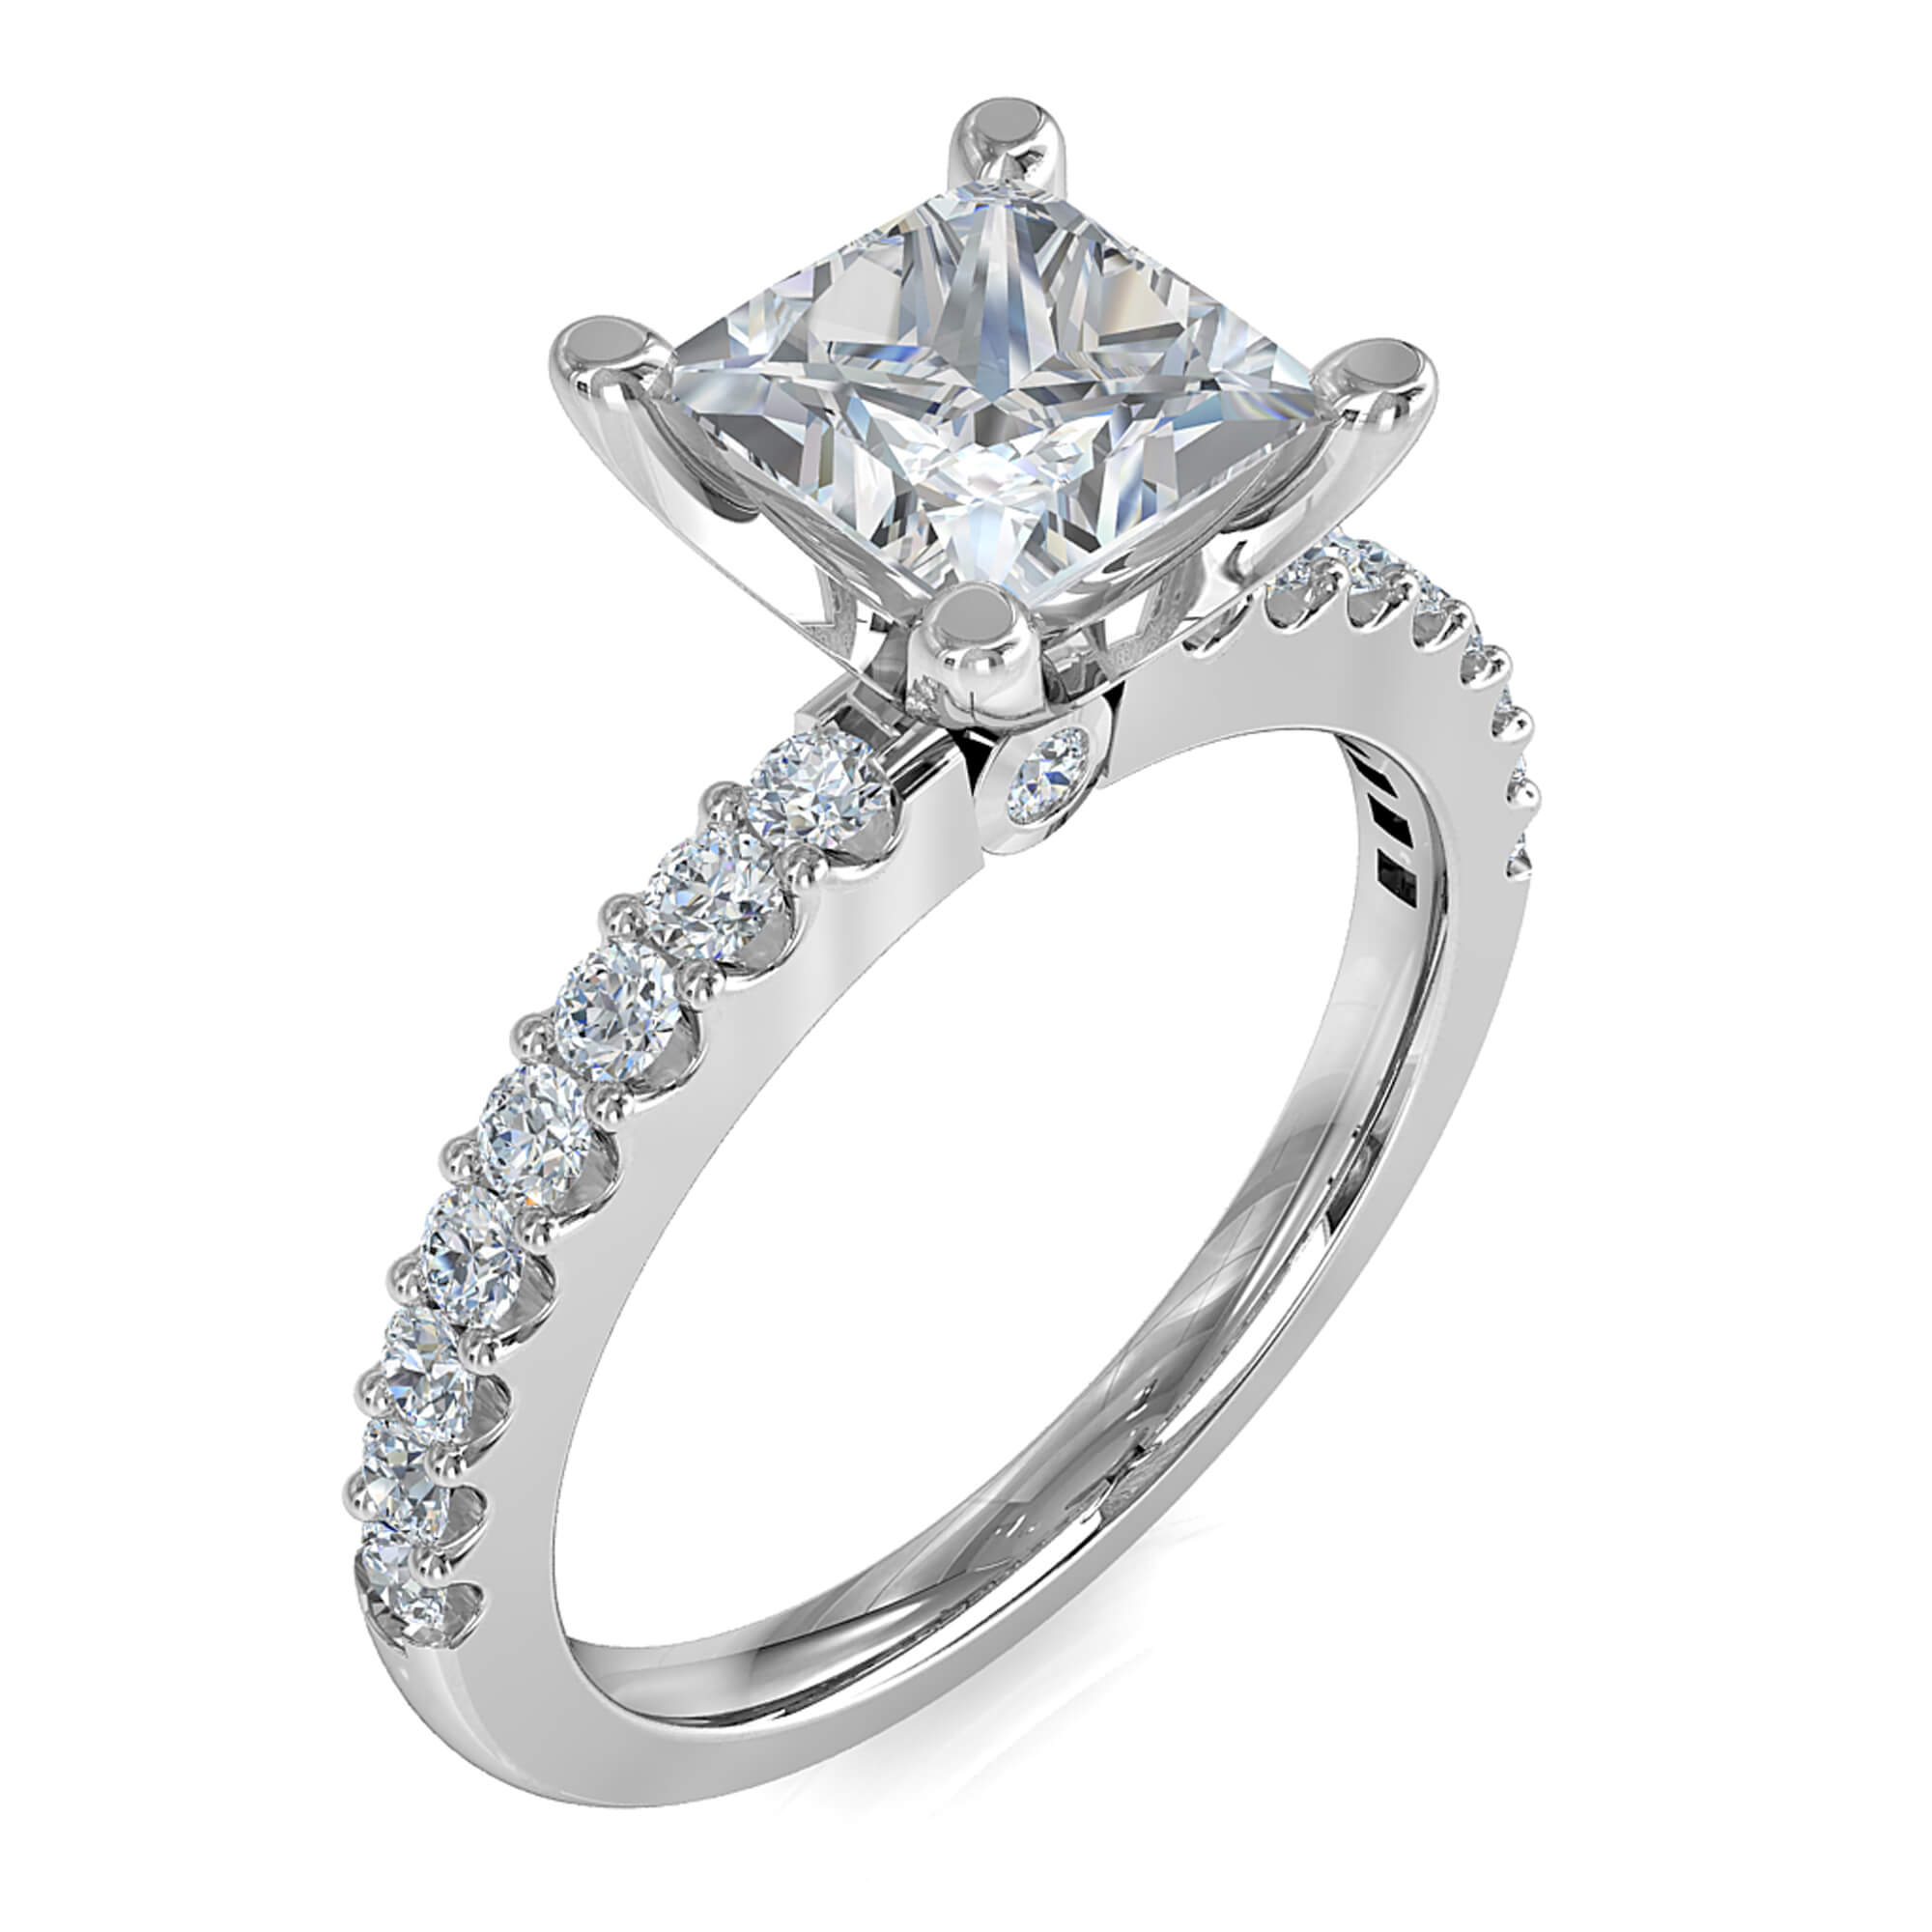 Princess Cut Solitaire Diamond Engagement Ring, 4 Claws Set on a Thin Cut Claw Band with a Hidden Diamond Undersetting.